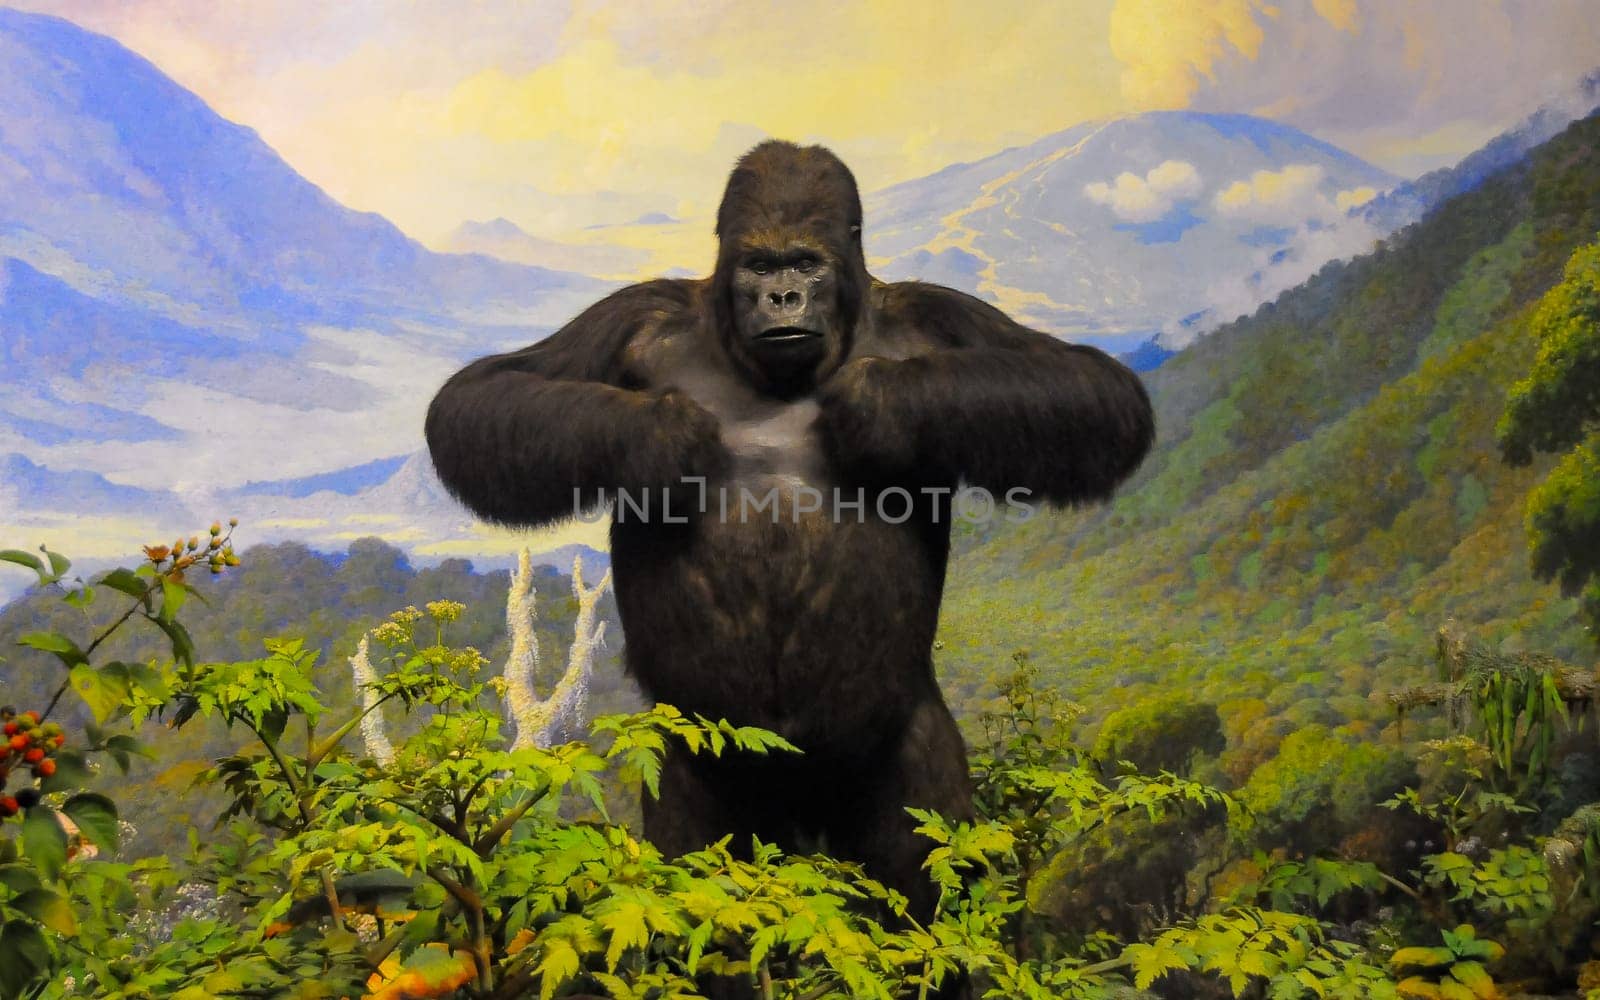 NEW YORK, USA - DECEMBER 05, 2011: A stuffed mountain gorilla on display at the Museum of National History, USA